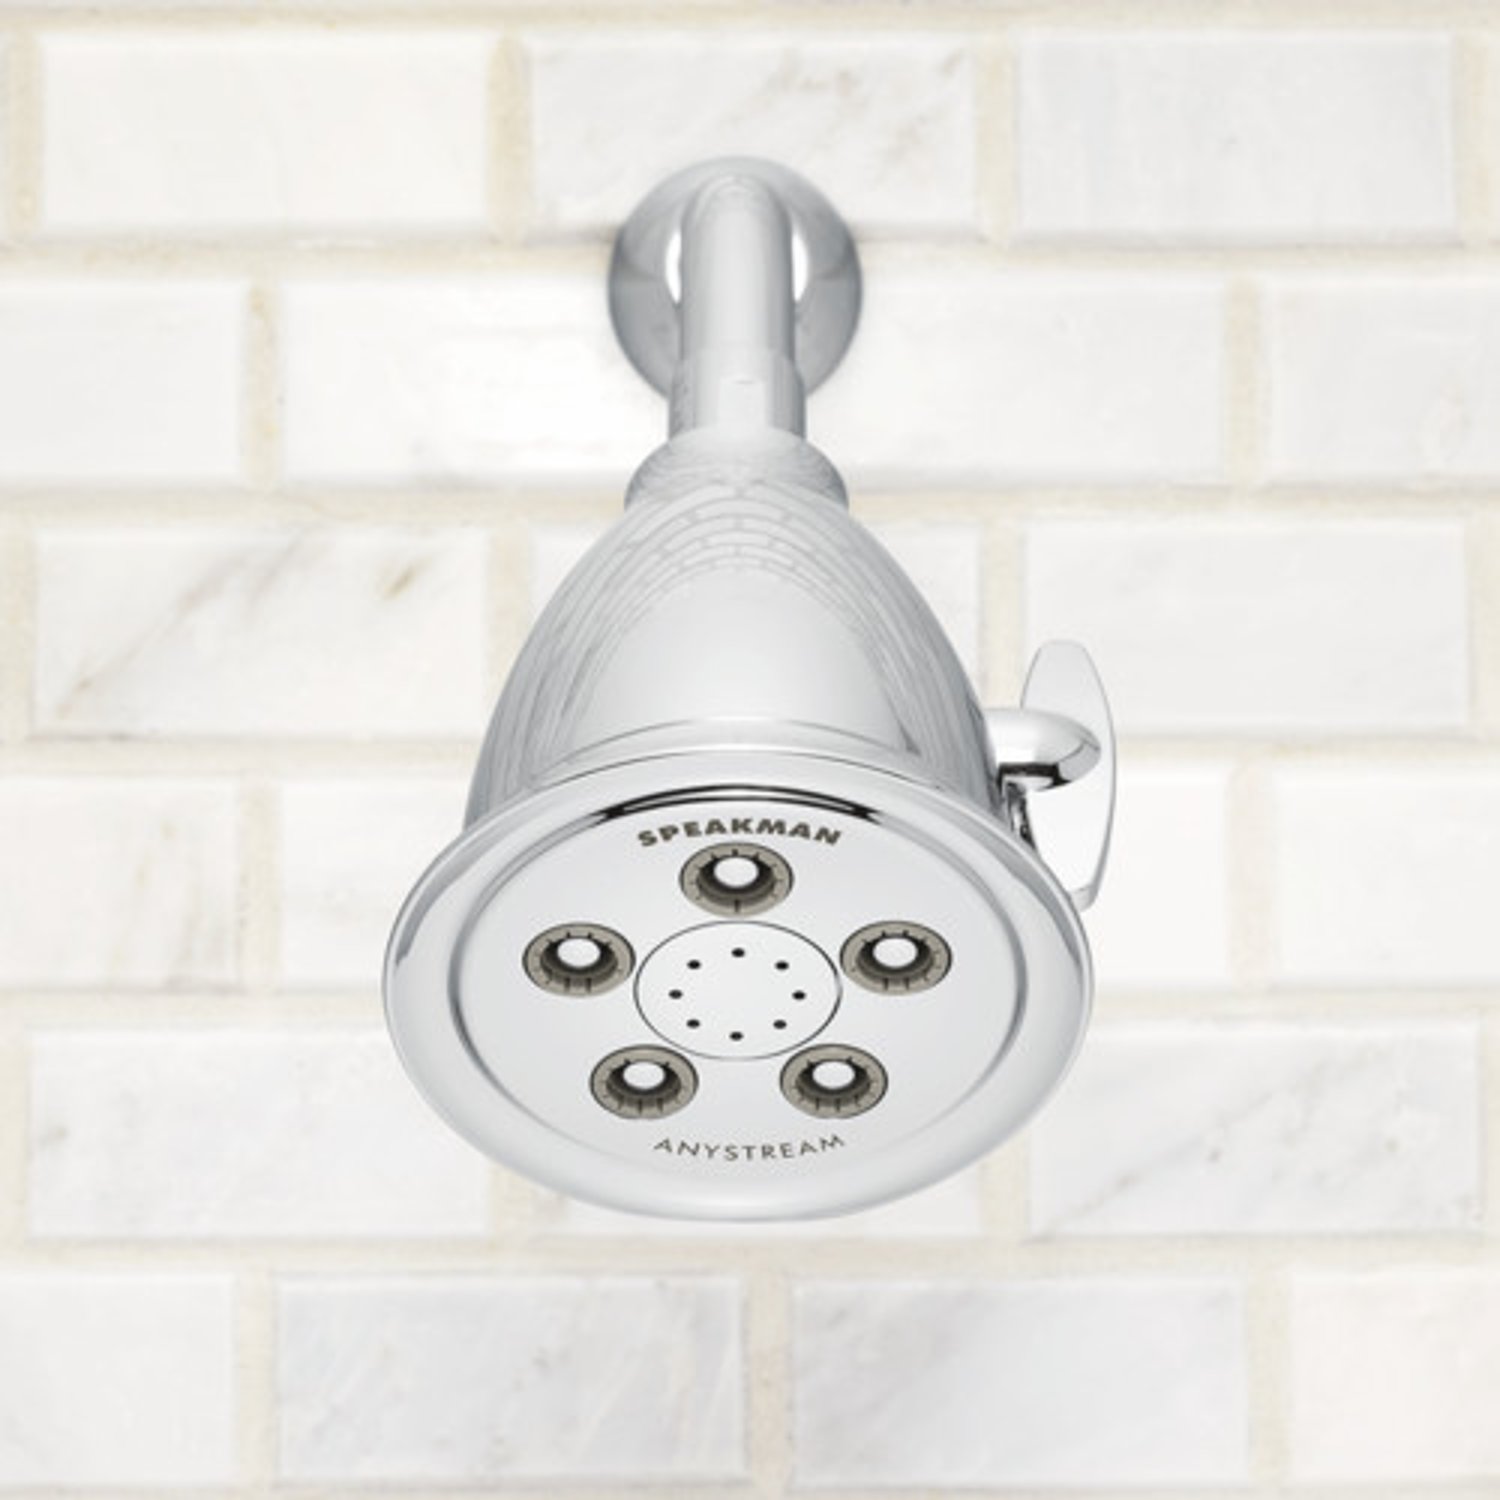 What Is The Showerhead GPM Compliant For California